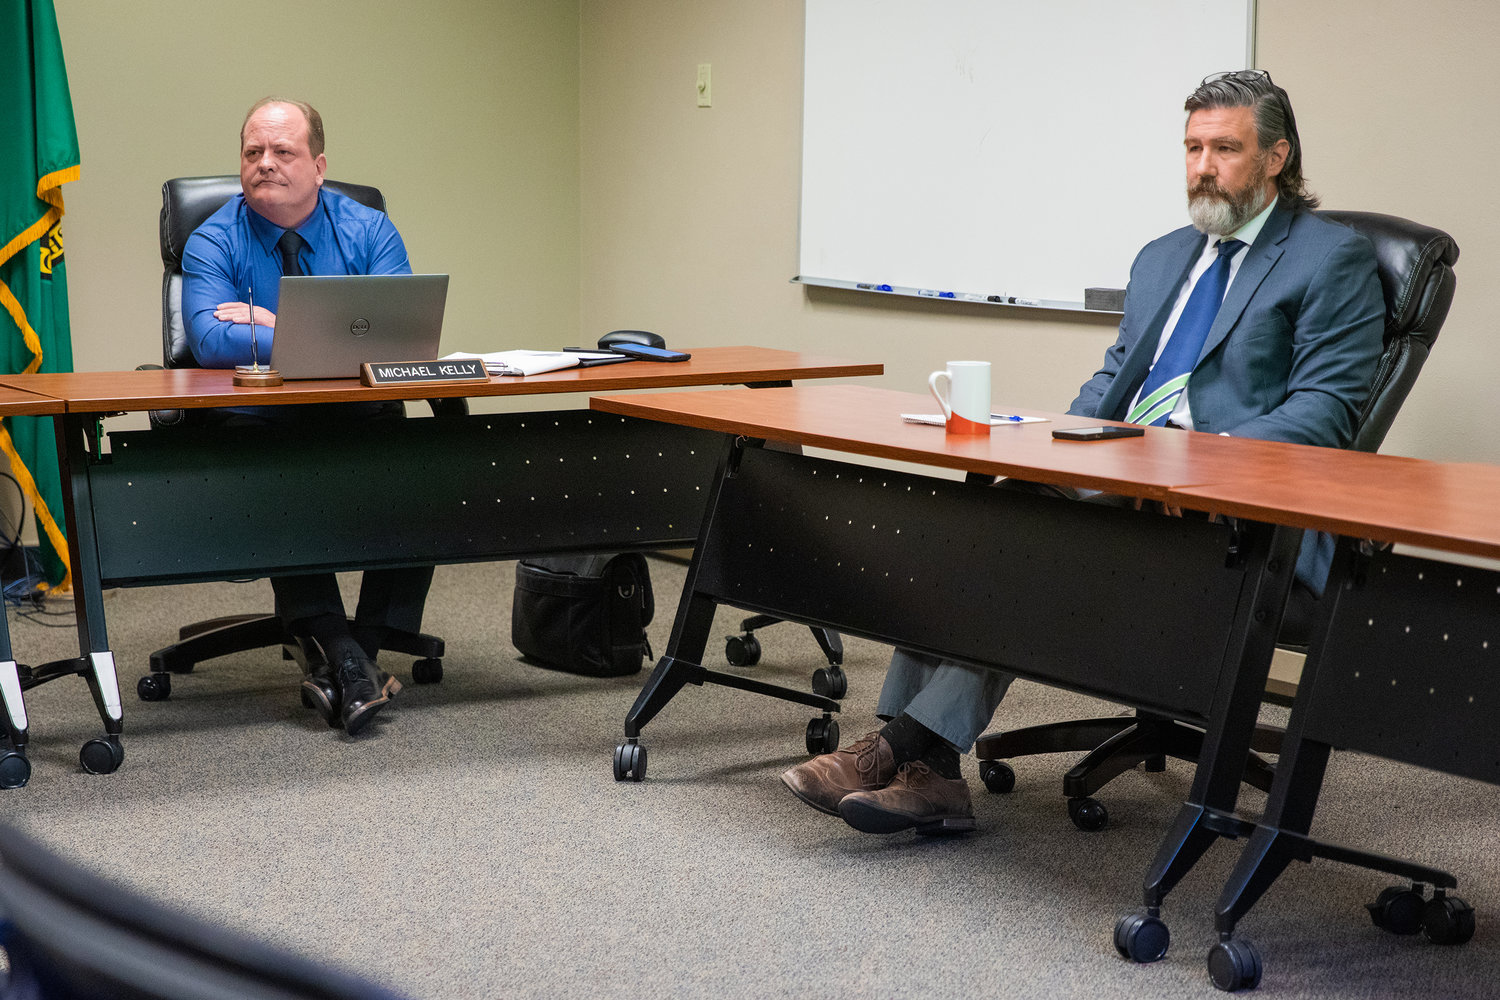 Commissioner Michael Kelly and General Manager Chris Rodin attend a Public Utility District meeting Tuesday morning in Chehalis.